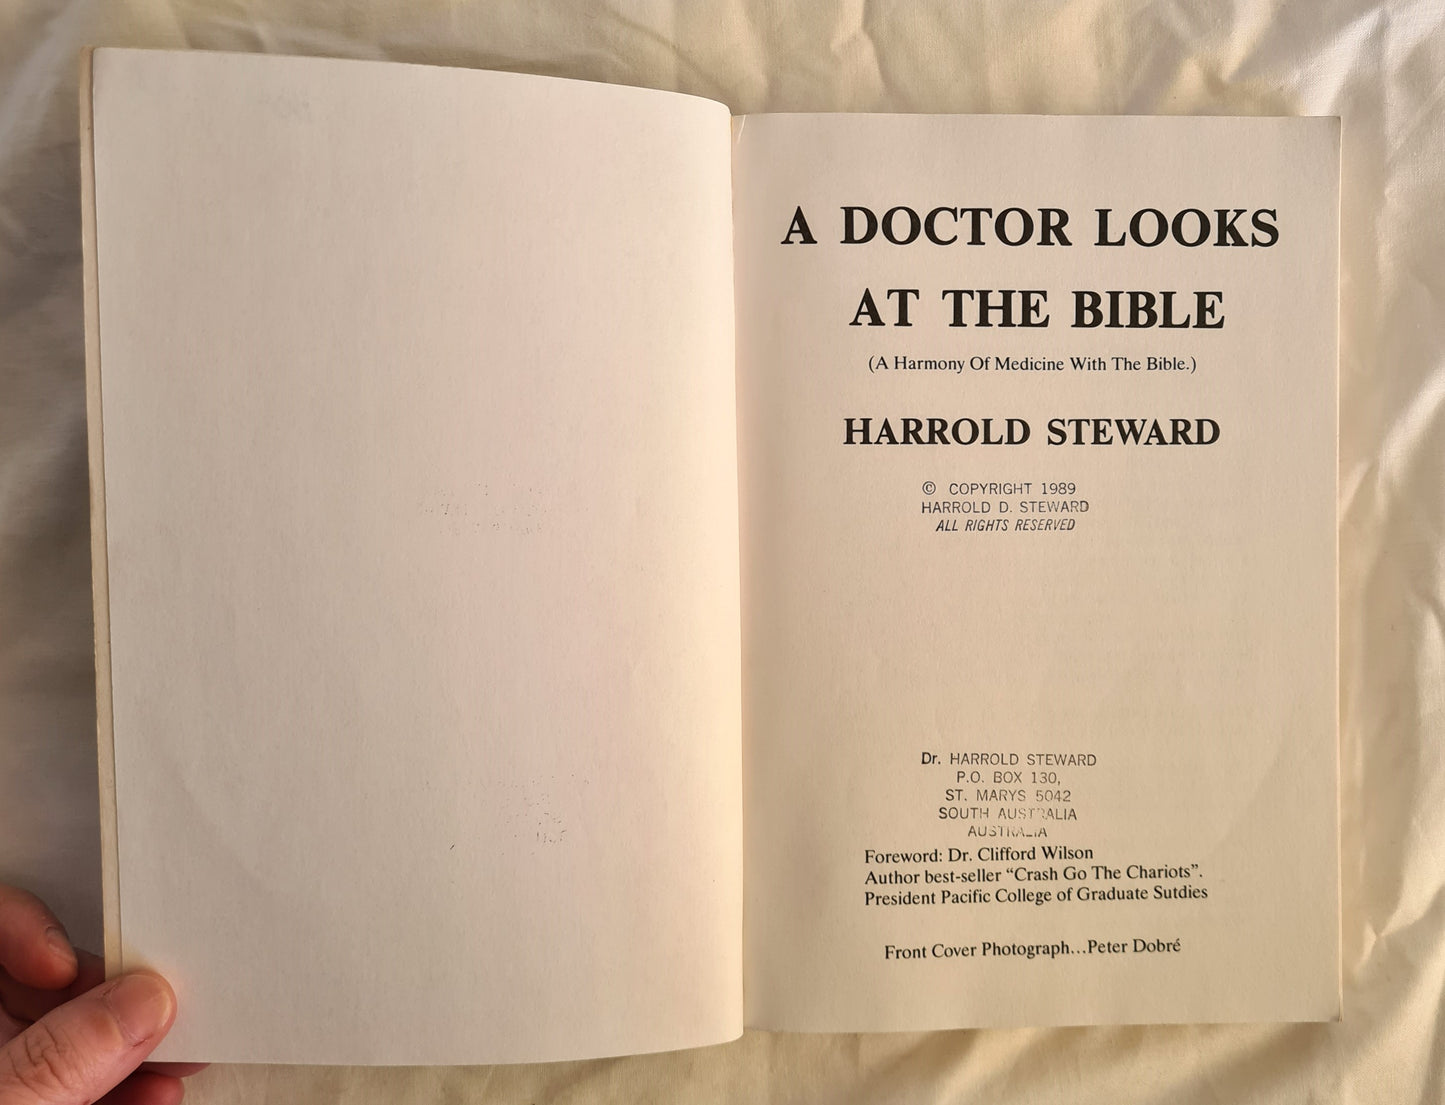 A Doctor Looks At The Bible by Harrold Steward